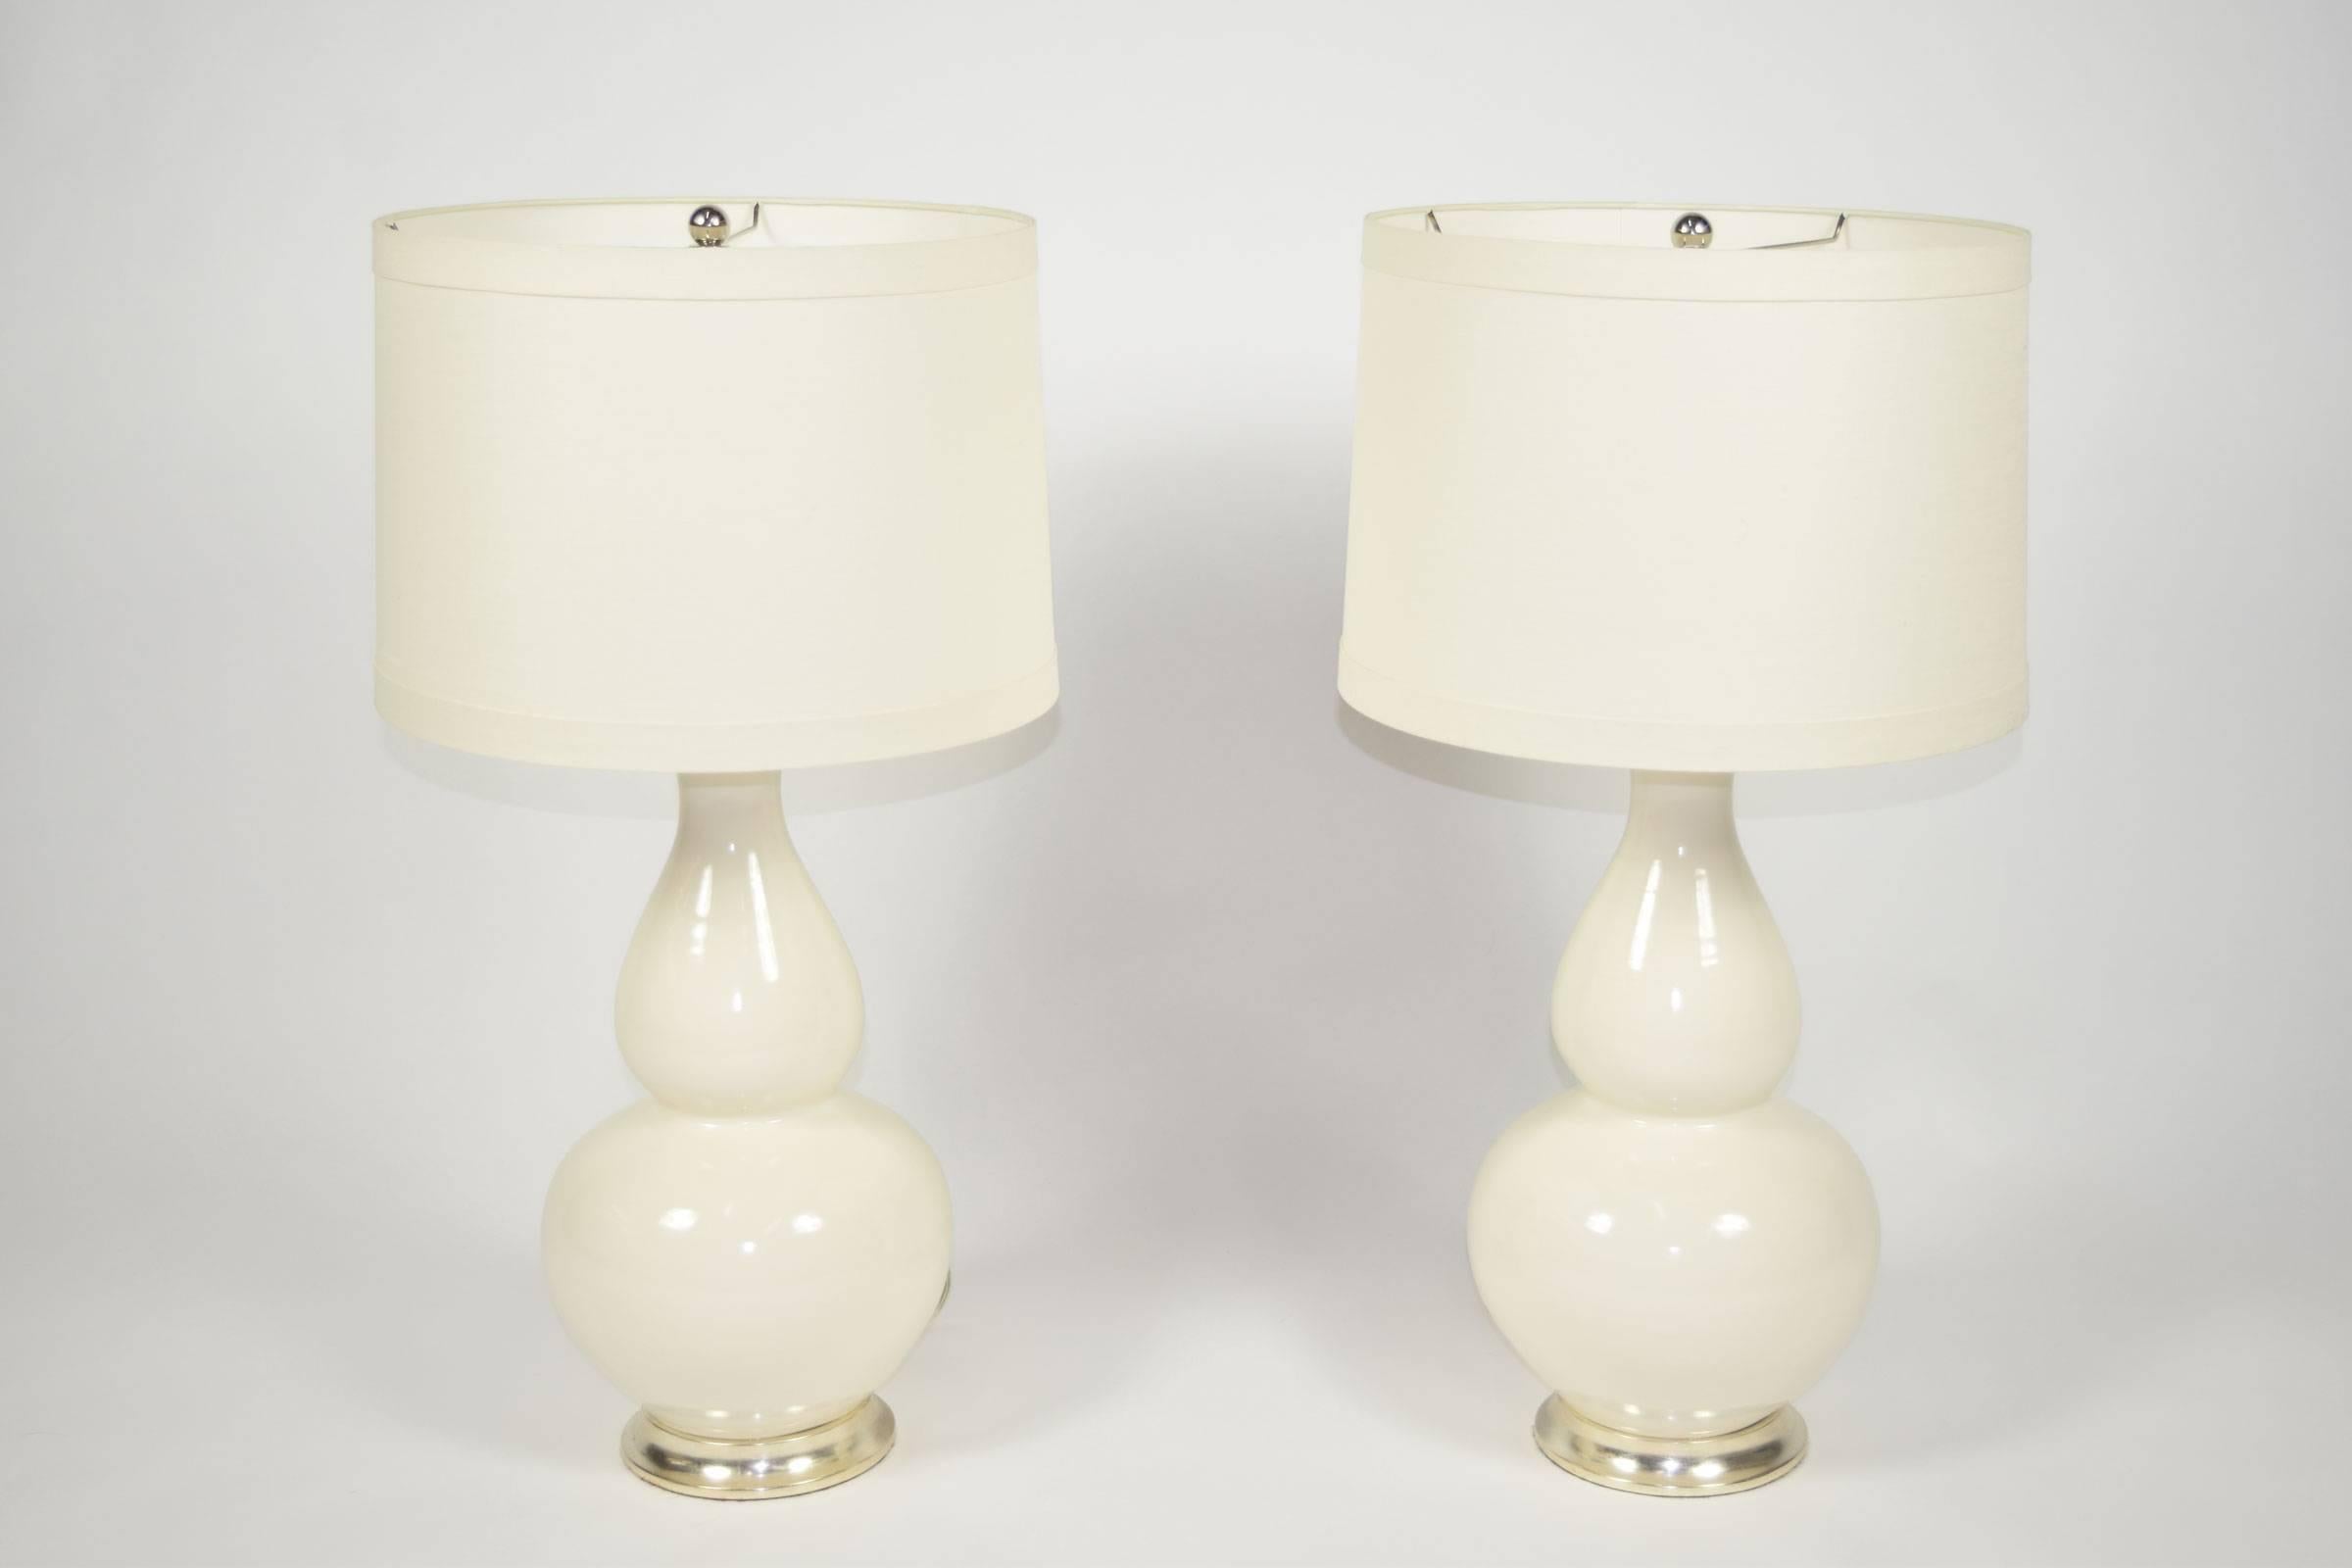 A gorgeous pair of Christopher Spitzmiller lamps in white ceramic with silver leaf bases and chrome lighting fixture. Shades are included and are a white linen with banding on top and bottom. Height is adjustable on these lams. The measurements